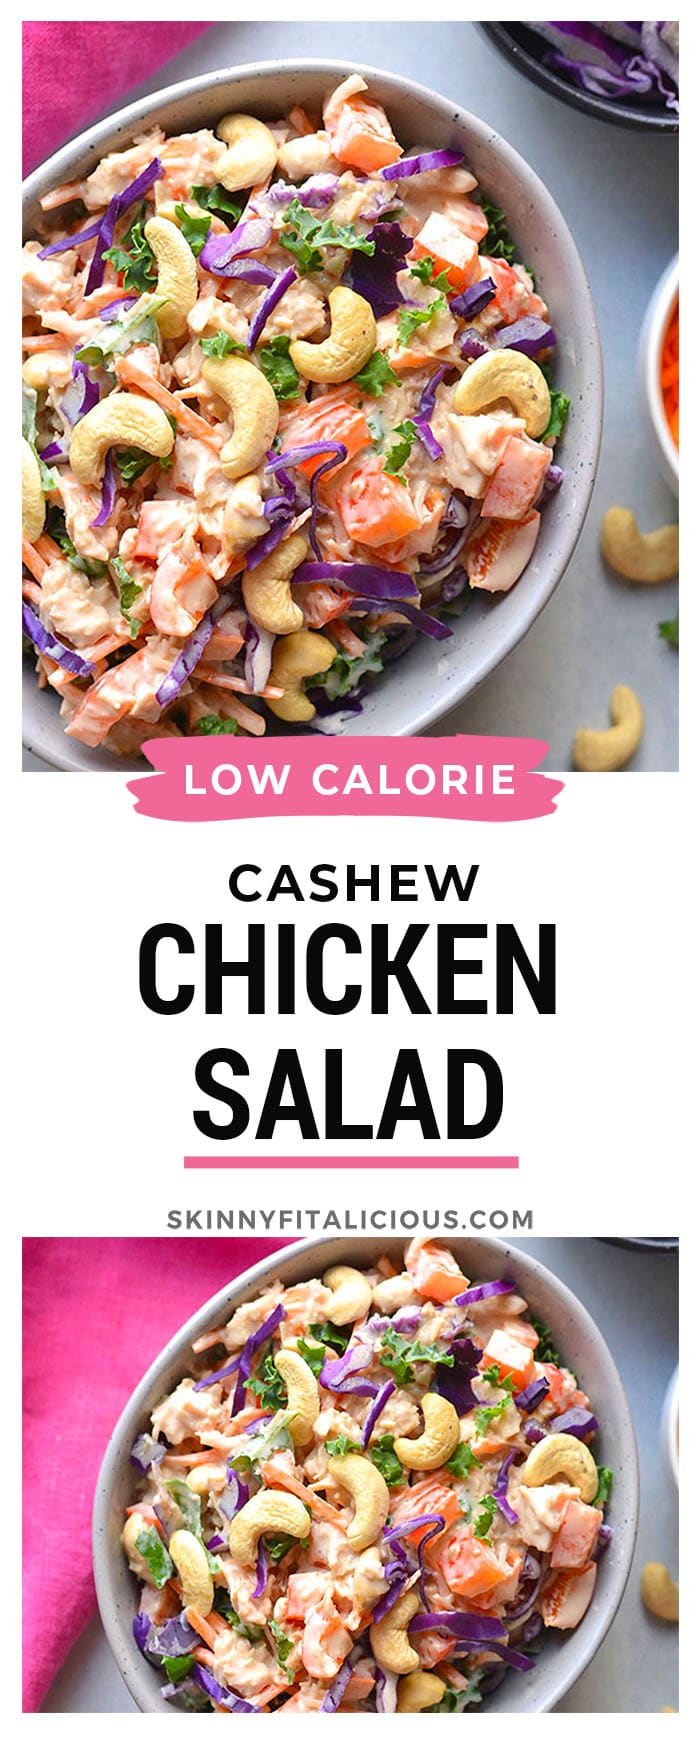 Healthy Cashew Chicken Salad made low calorie with Greek yogurt, Asian flavors, bell peppers and cabbage. A healthy recipe that is mayo free and egg free. A great make ahead lunch to meal prep! Gluten Free + Low Calorie + Low Carb